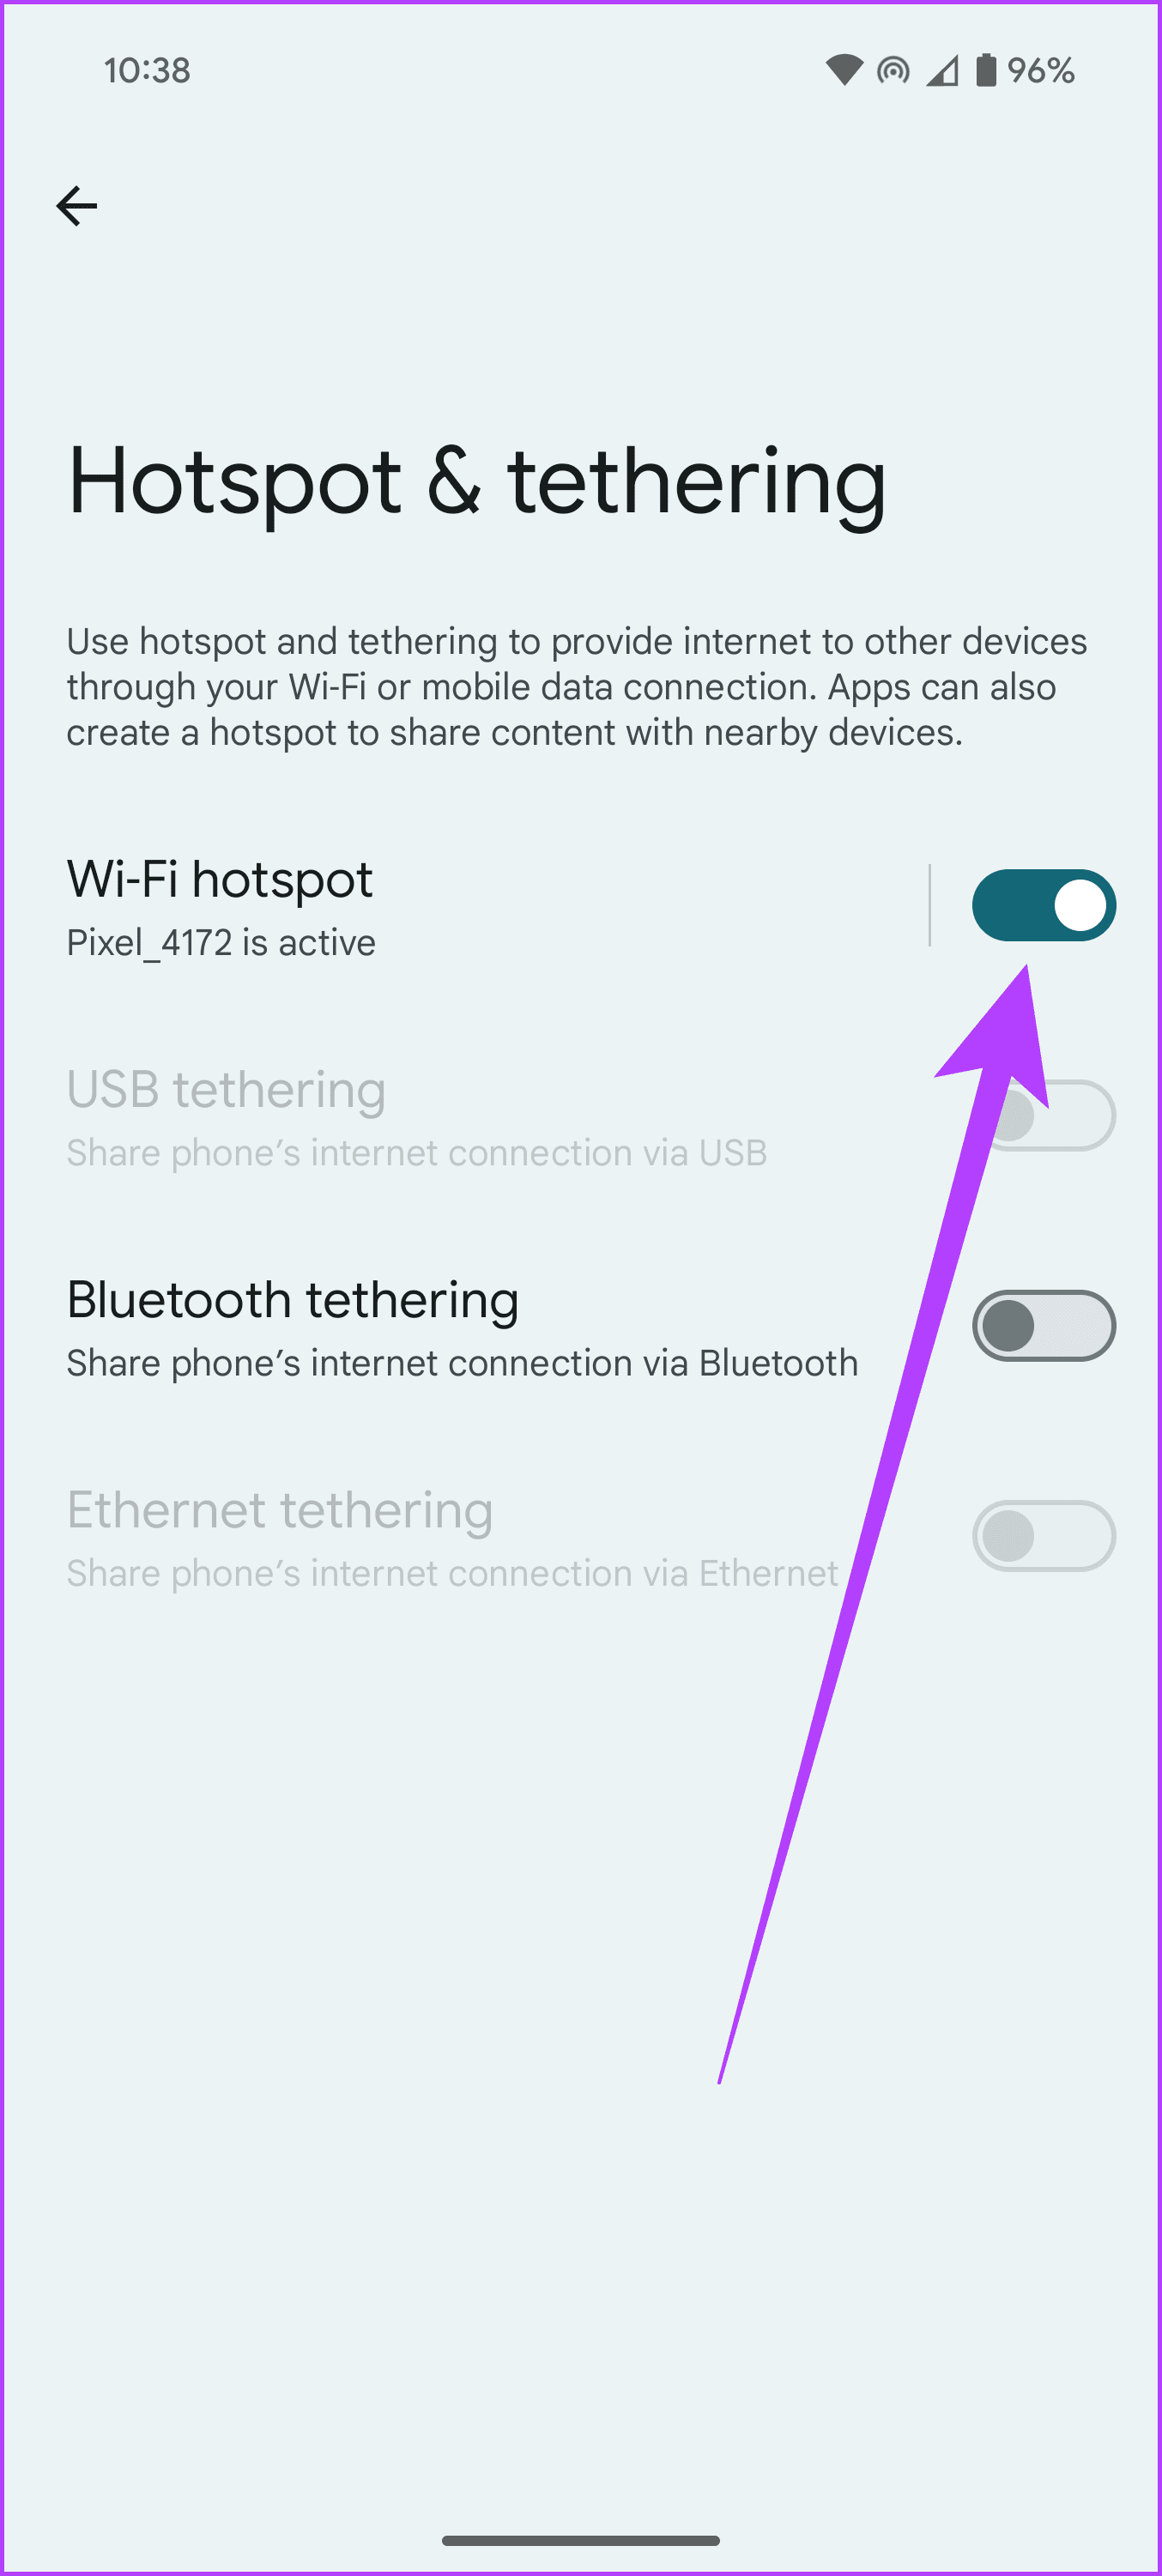 3.4 Now enable the toggle next to Wi Fi hotspot